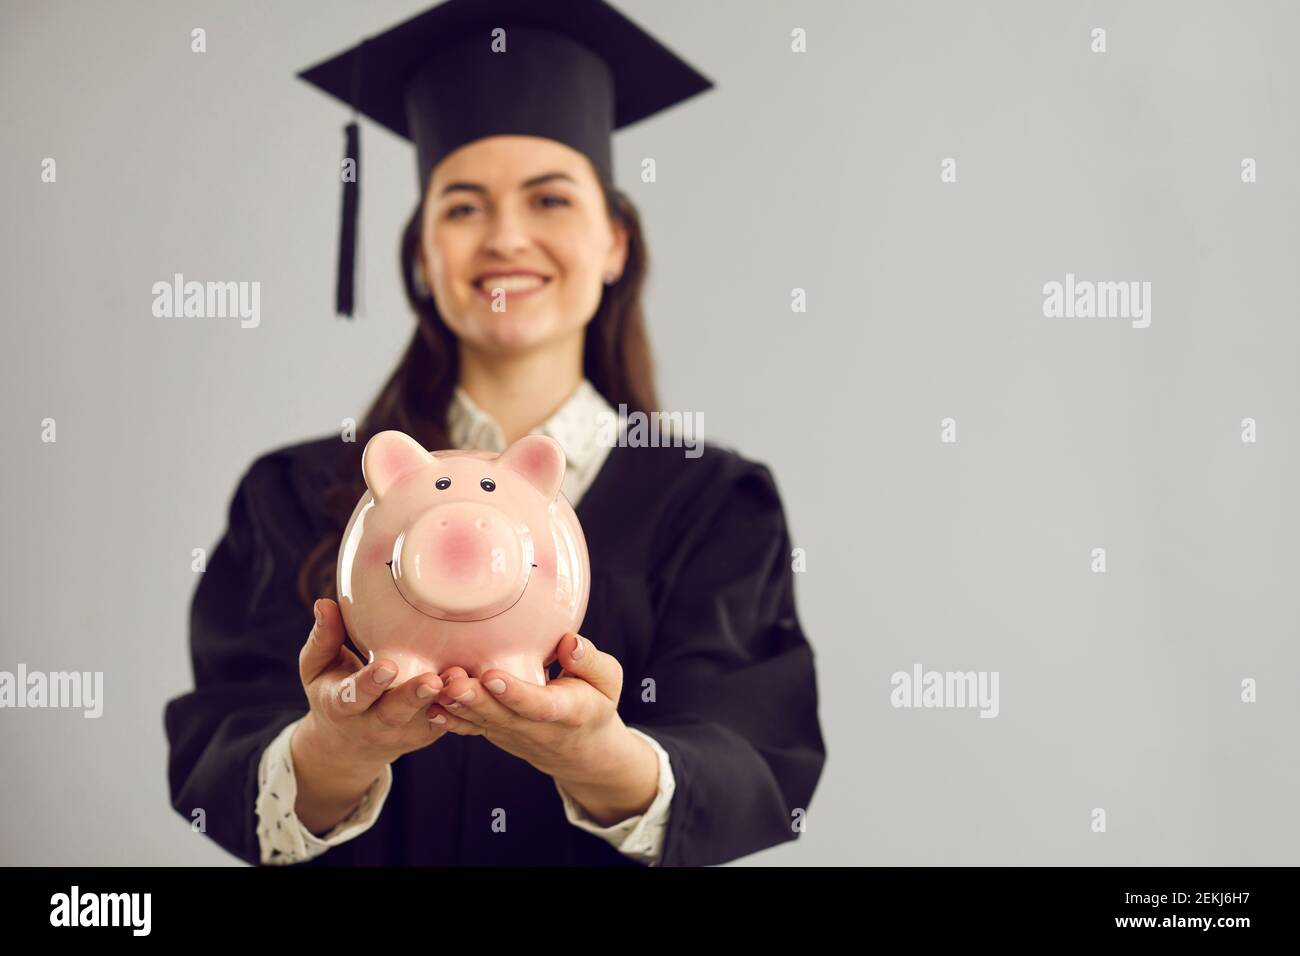 Pink piggy bank in the hands of a joyful female student standing on a gray background. Stock Photo